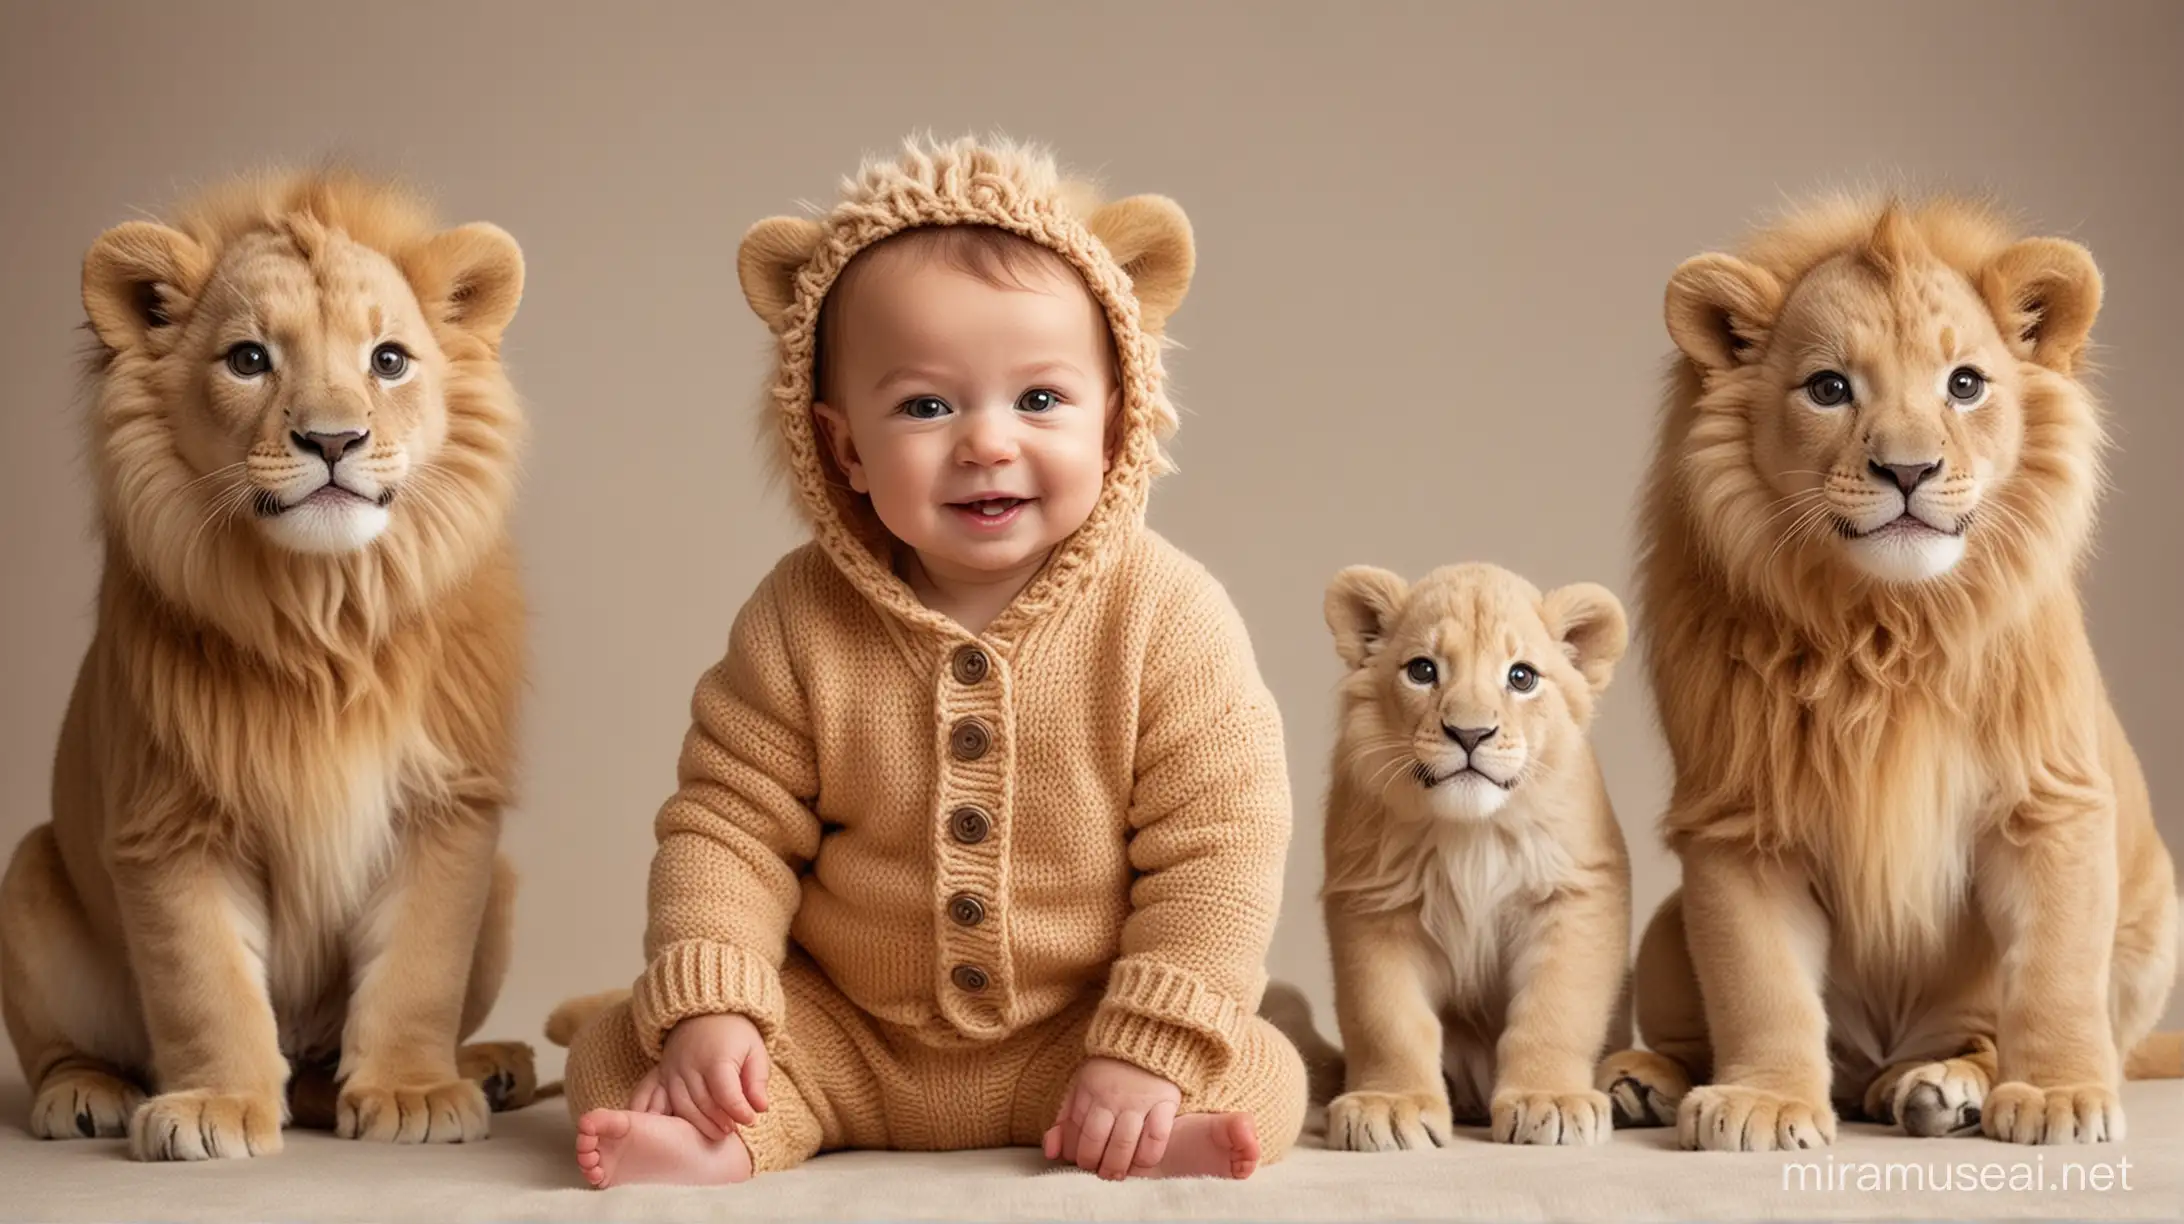 Portrait of a skinny smiling Baby in a cute knitted suit surrounded by two kissing Lions